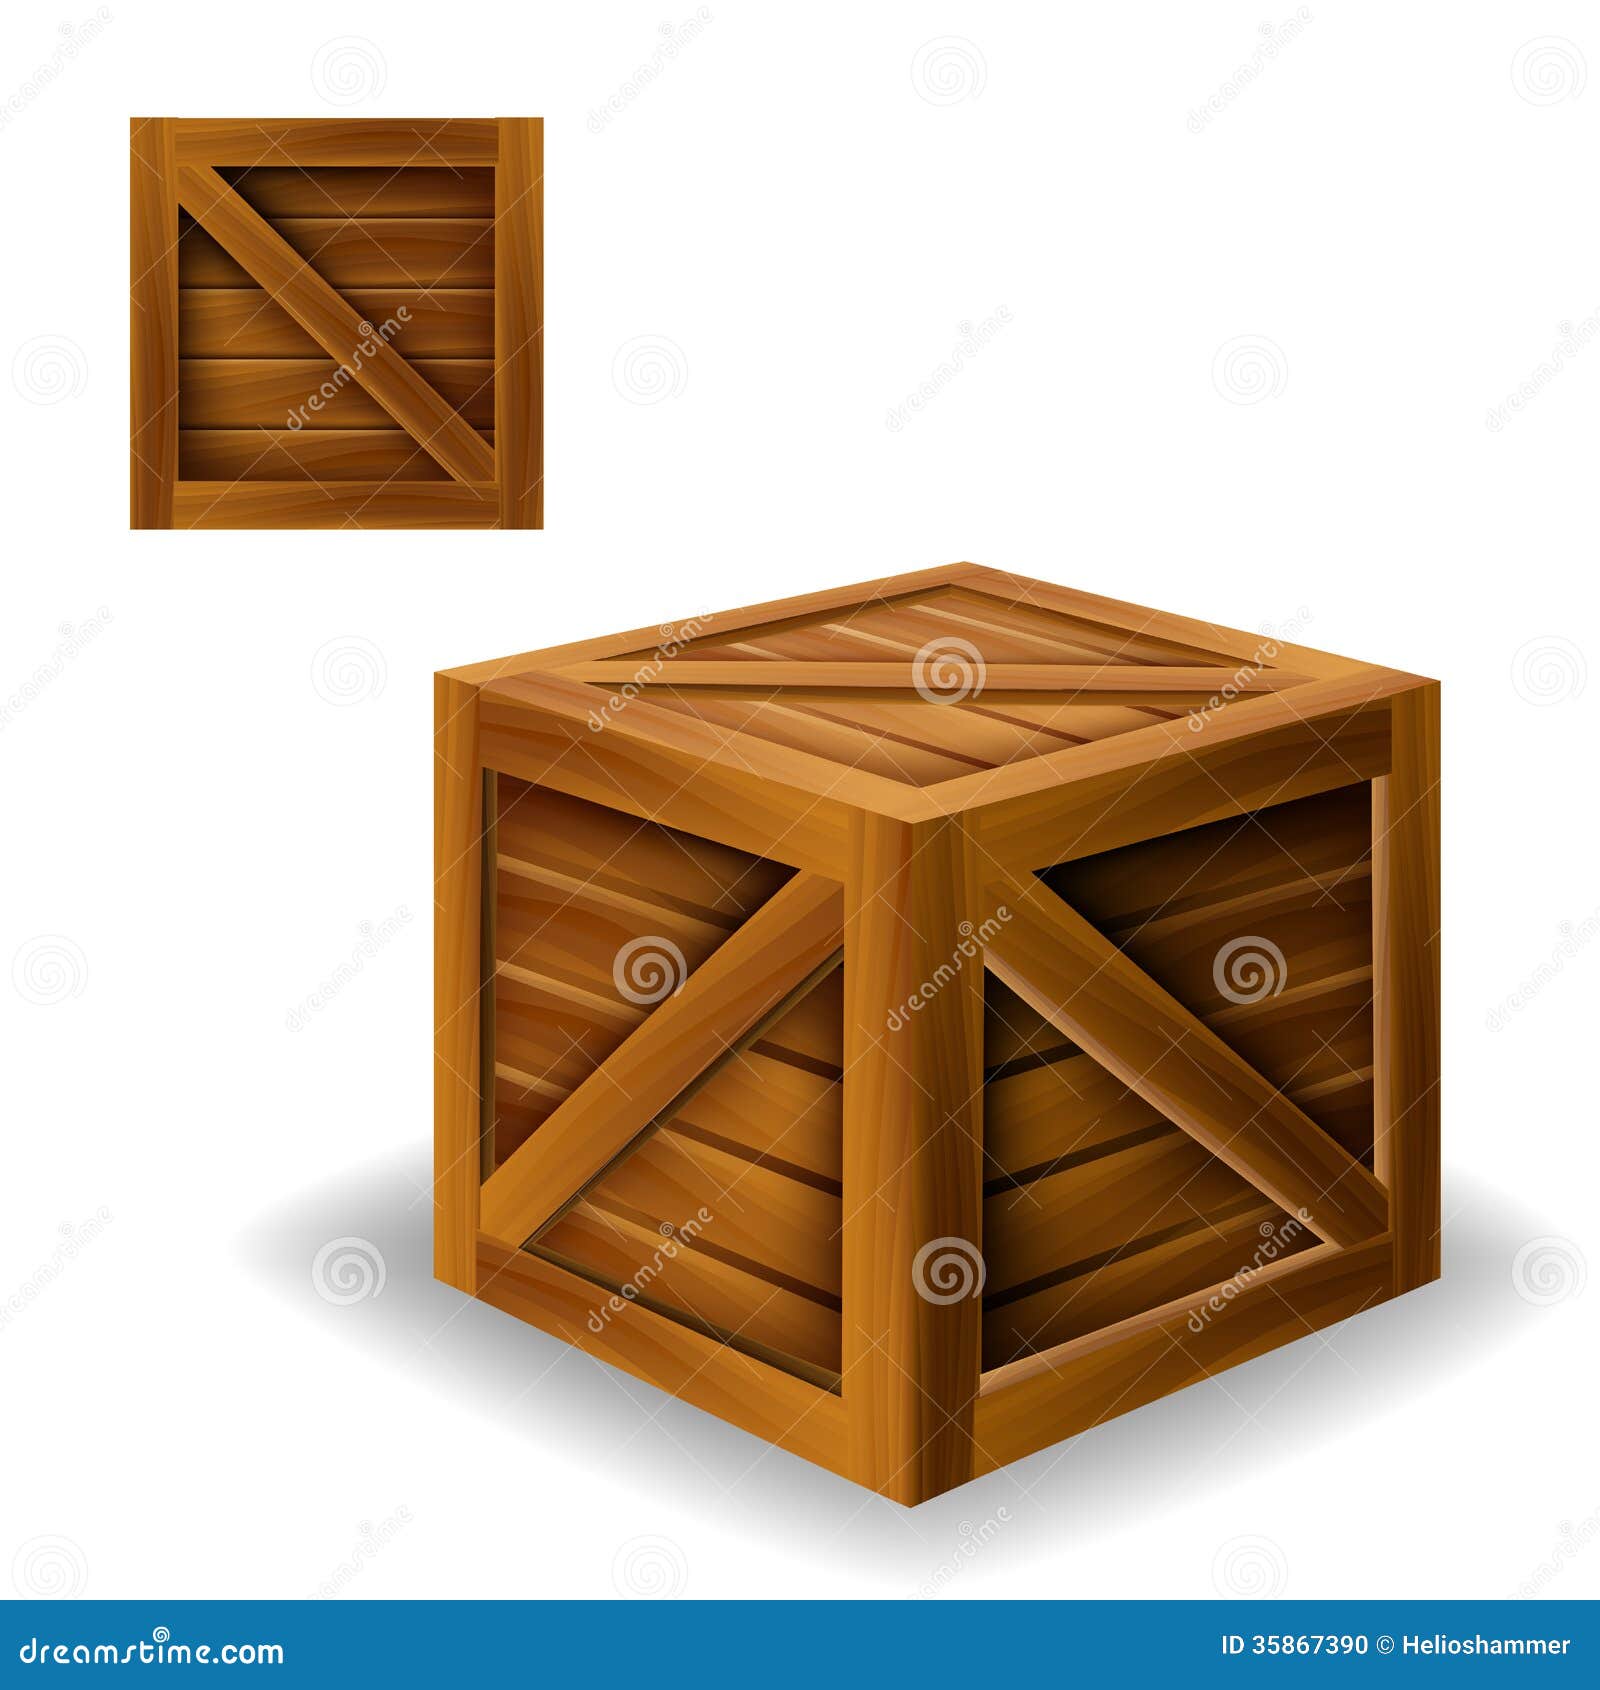 Wood box from two positions with wood texture for cargo eps10.